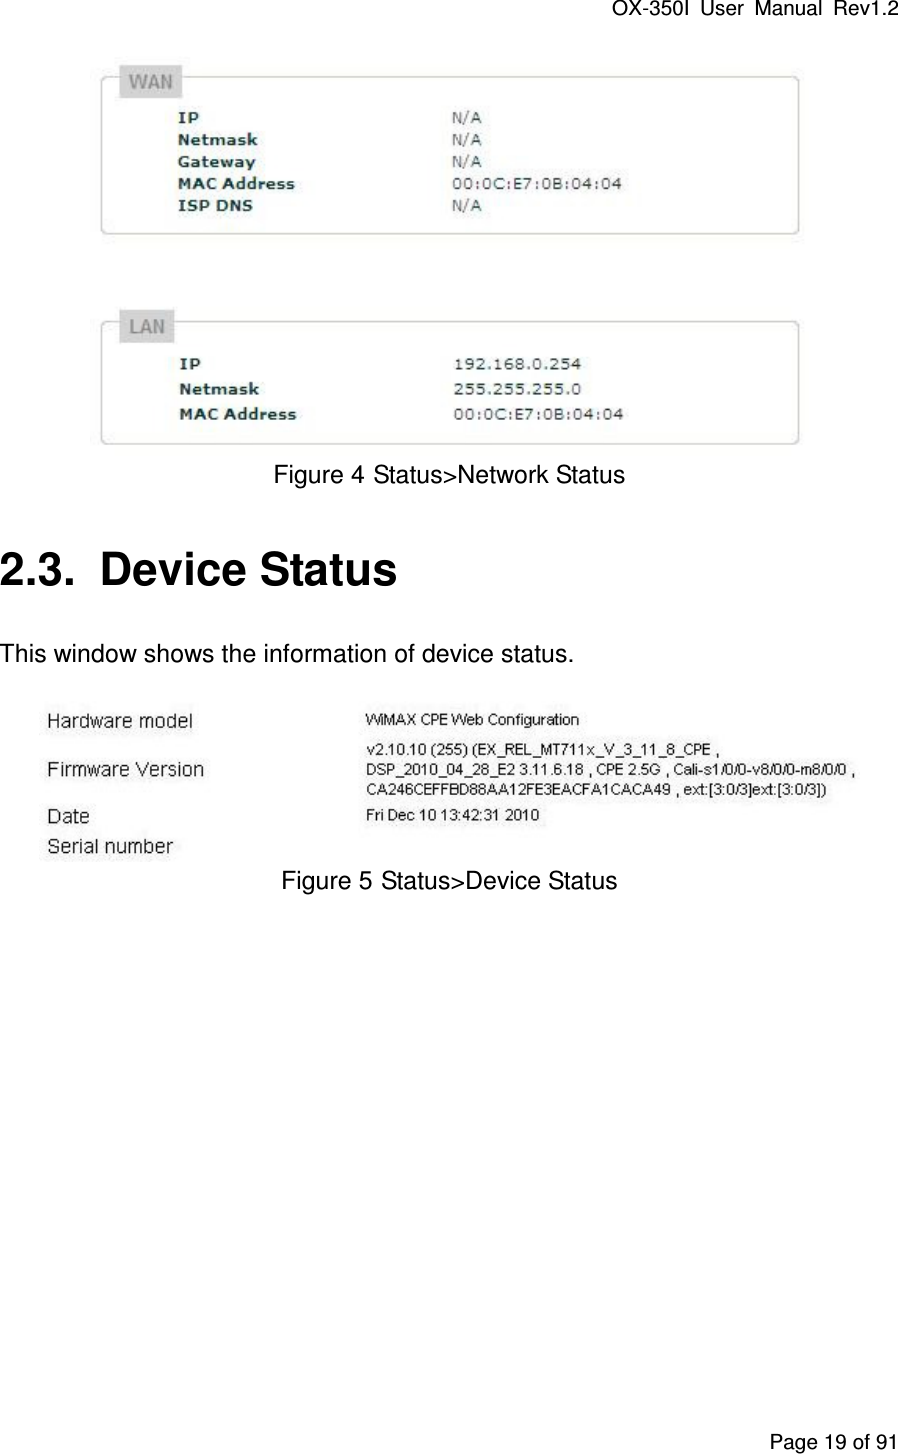 OX-350I  User  Manual  Rev1.2 Page 19 of 91  Figure 4 Status&gt;Network Status 2.3.  Device Status This window shows the information of device status.  Figure 5 Status&gt;Device Status 